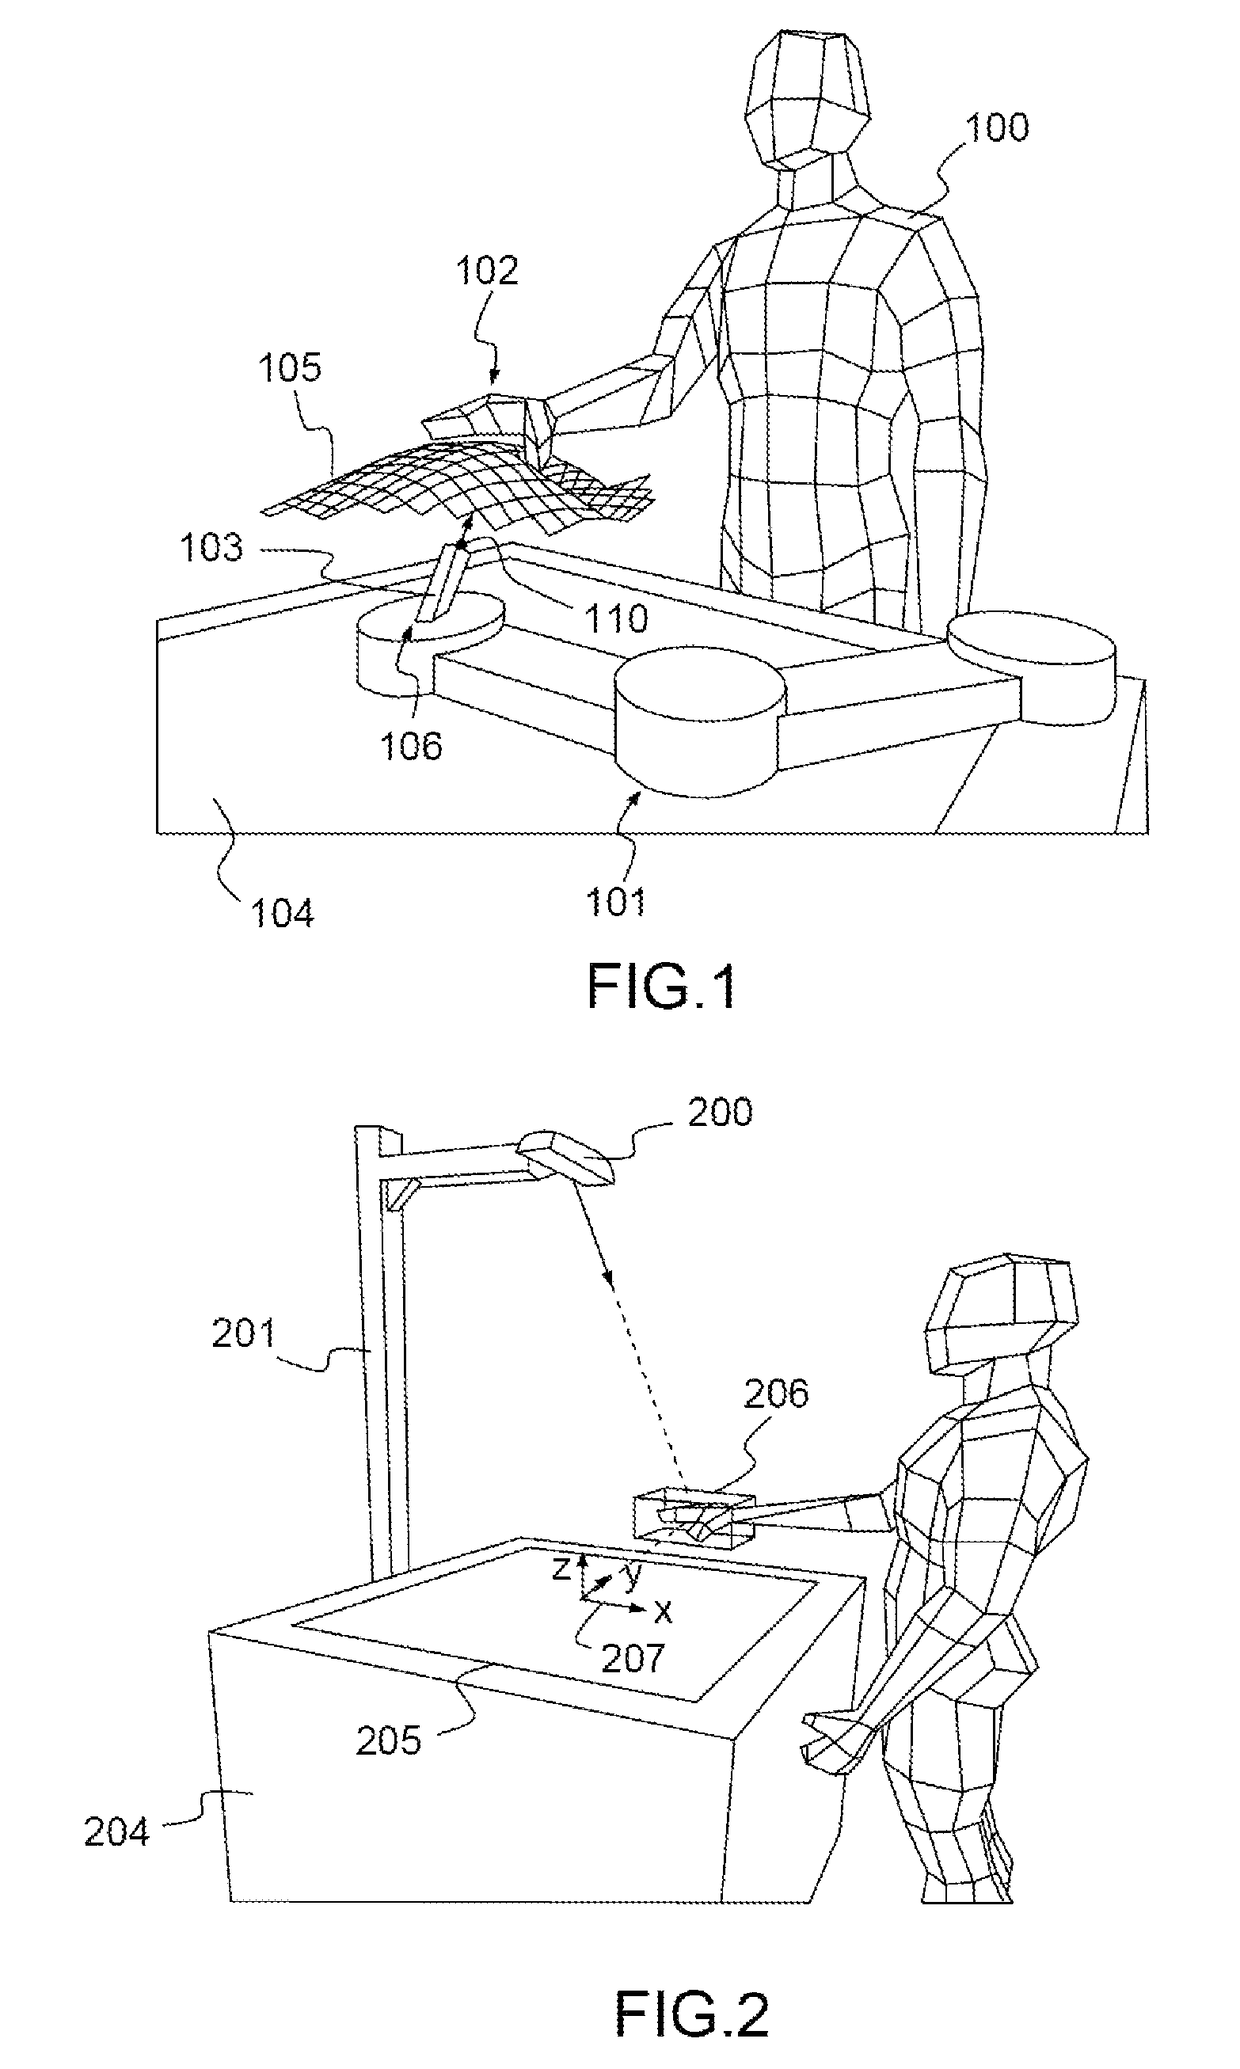 Haptic system for establishing a contact free interaction between at least one part of a user's body and a virtual environment